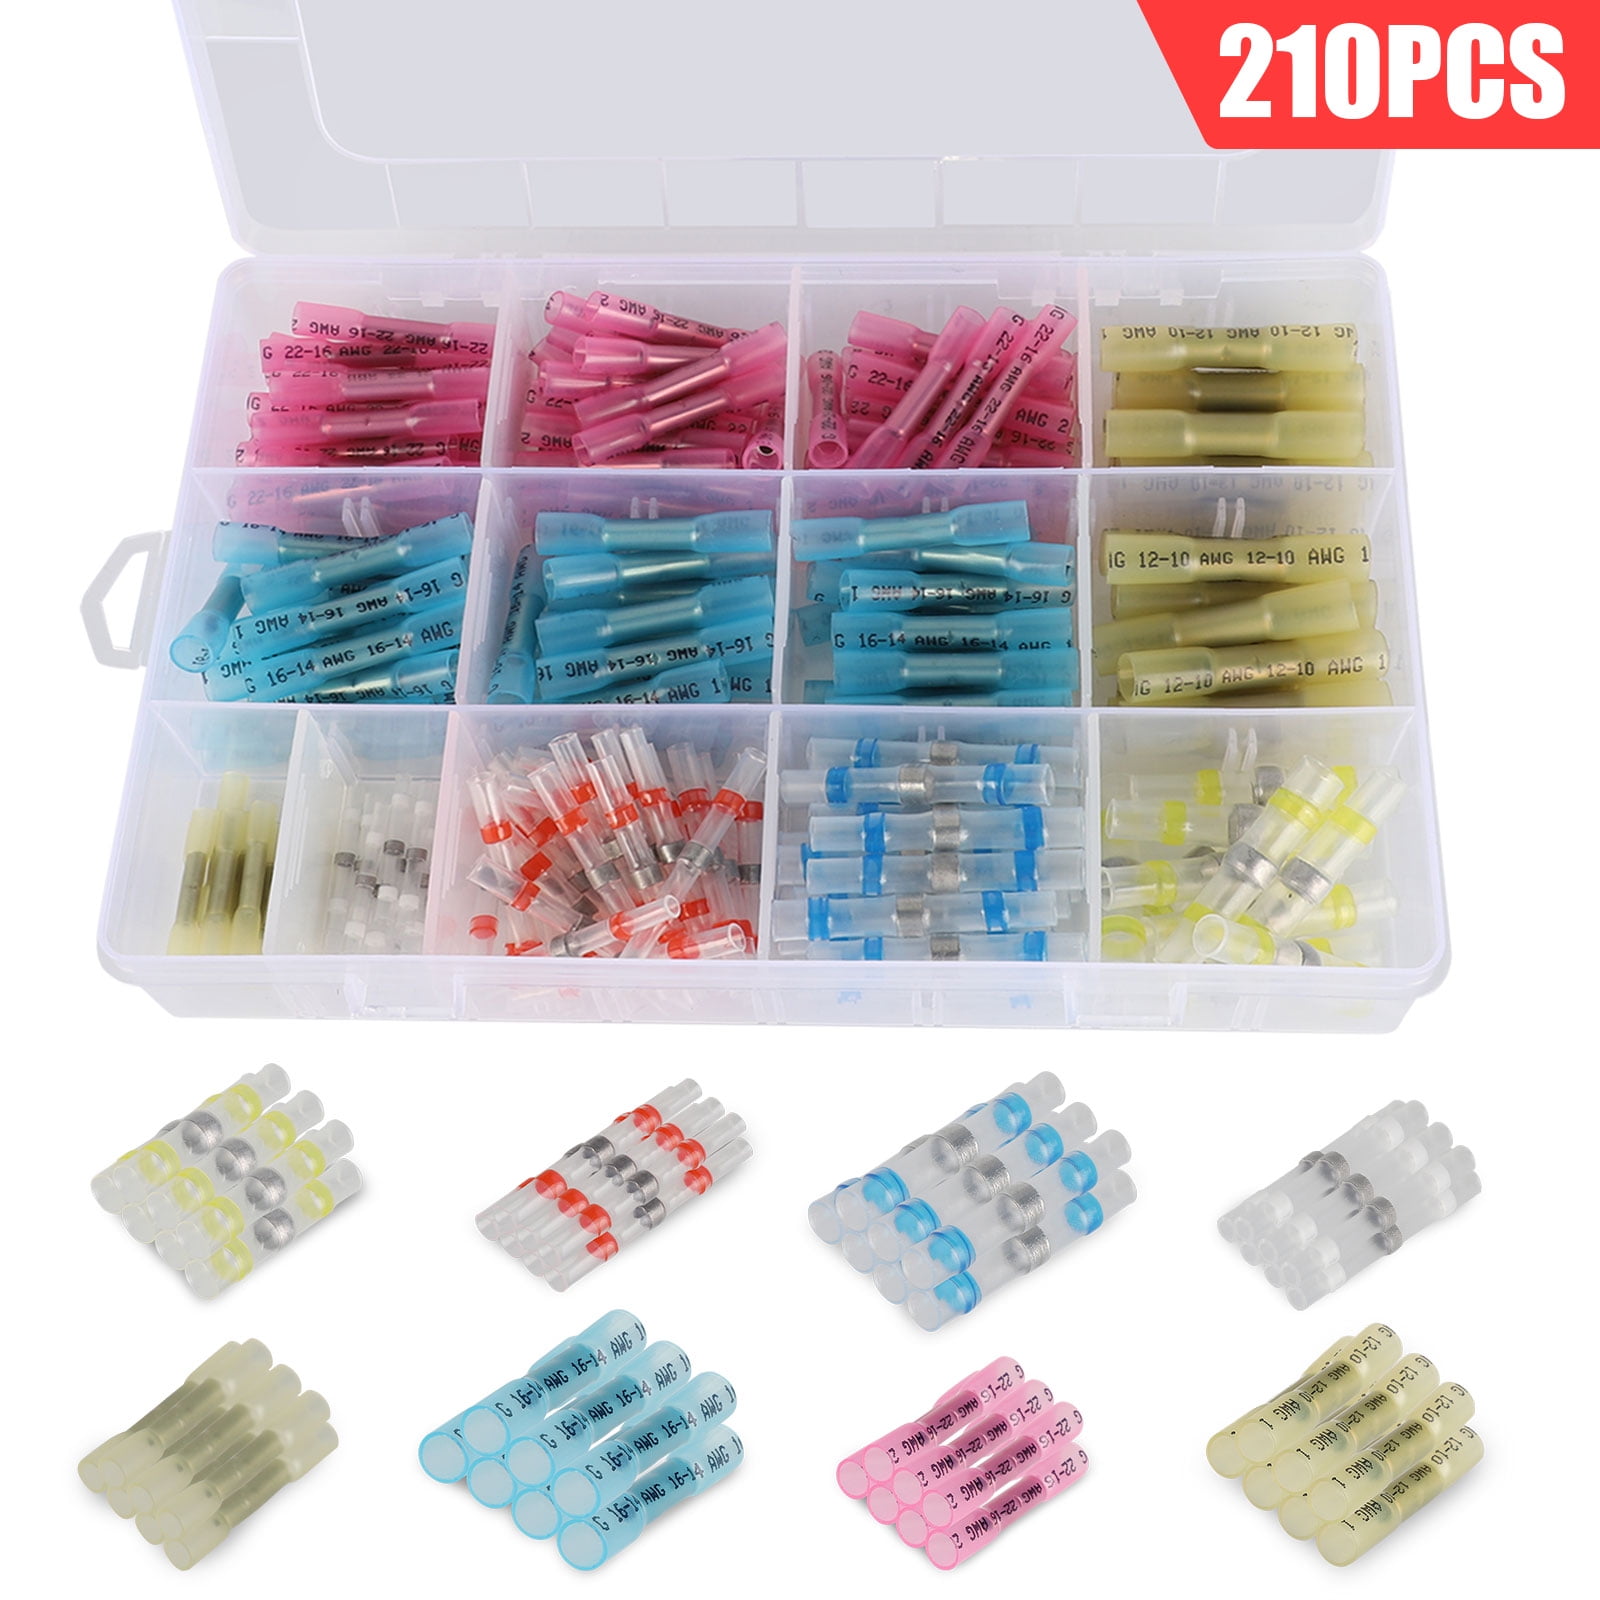 Heat Shrink Wire Terminals Kit 210Pcs Support An Easy One Step Connection Wires 